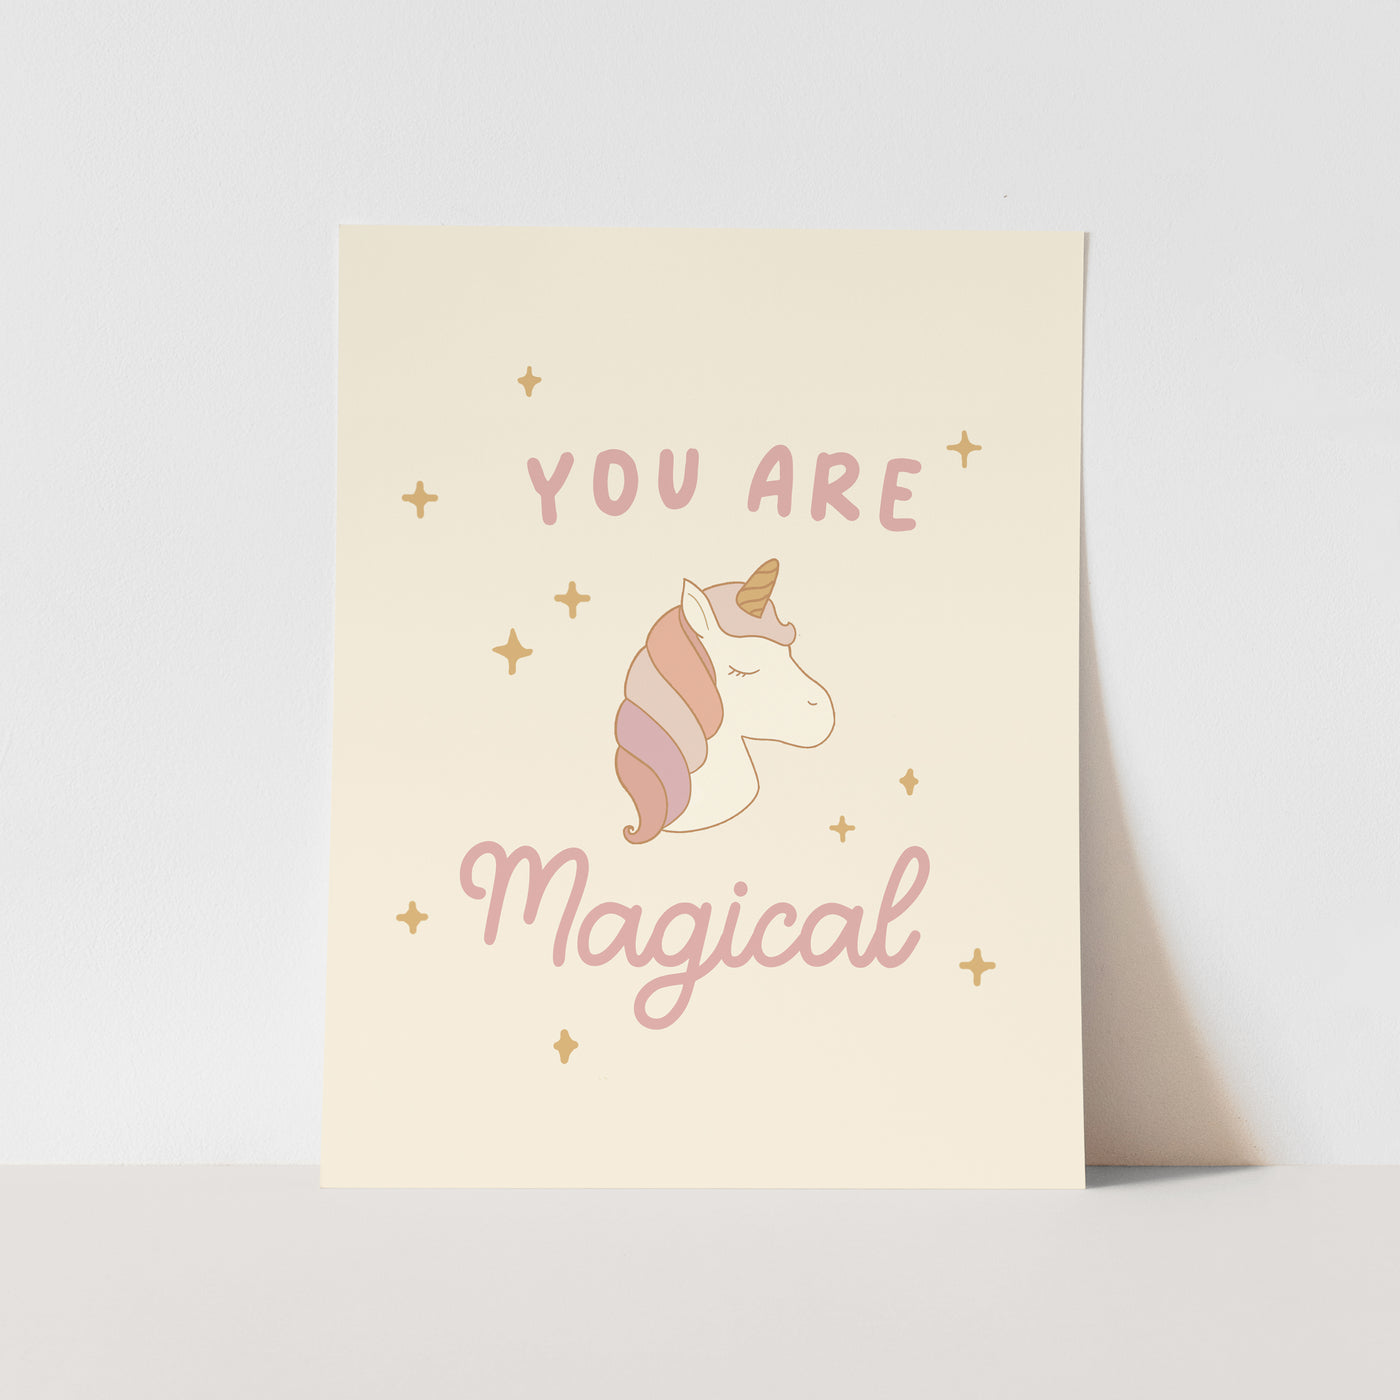 Art Print: You Are Magical